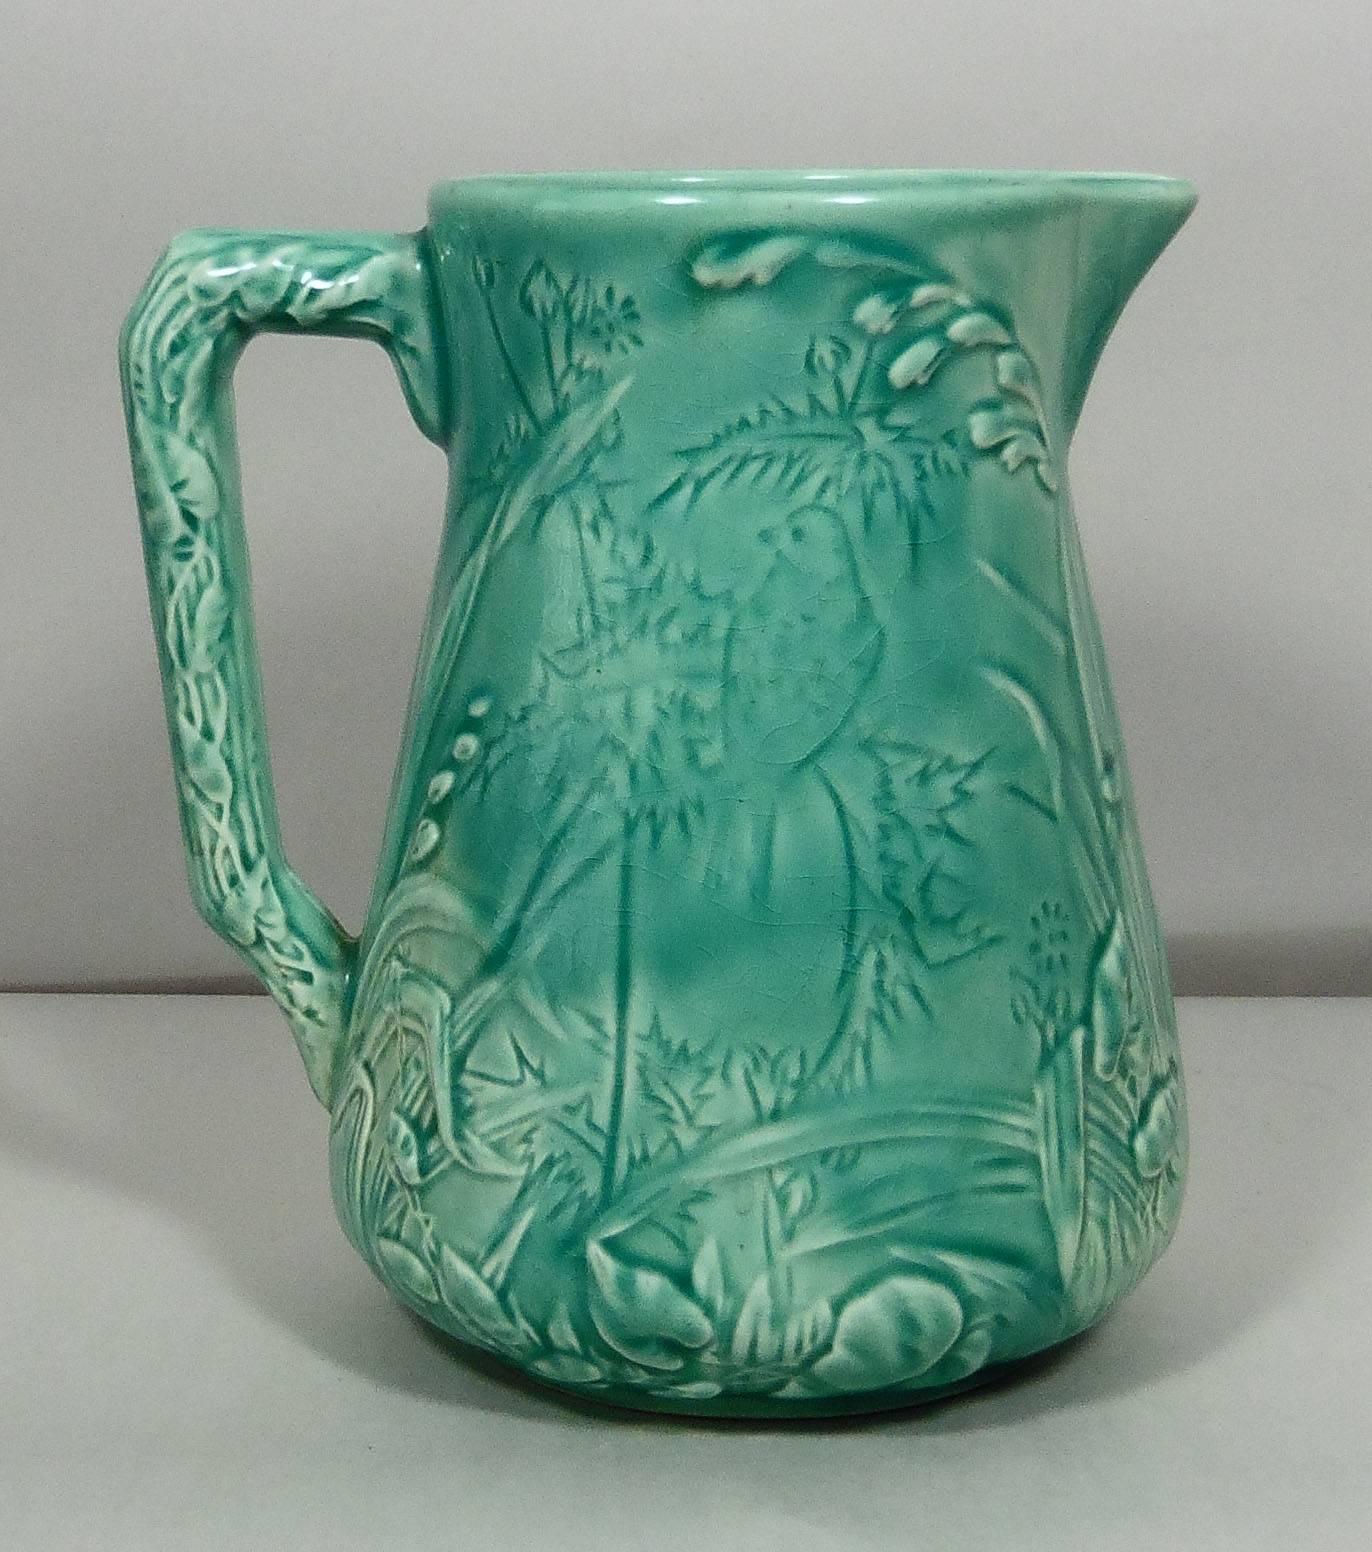 Aesthetic Movement 19th French Majolica Turquoise Bird Pitcher